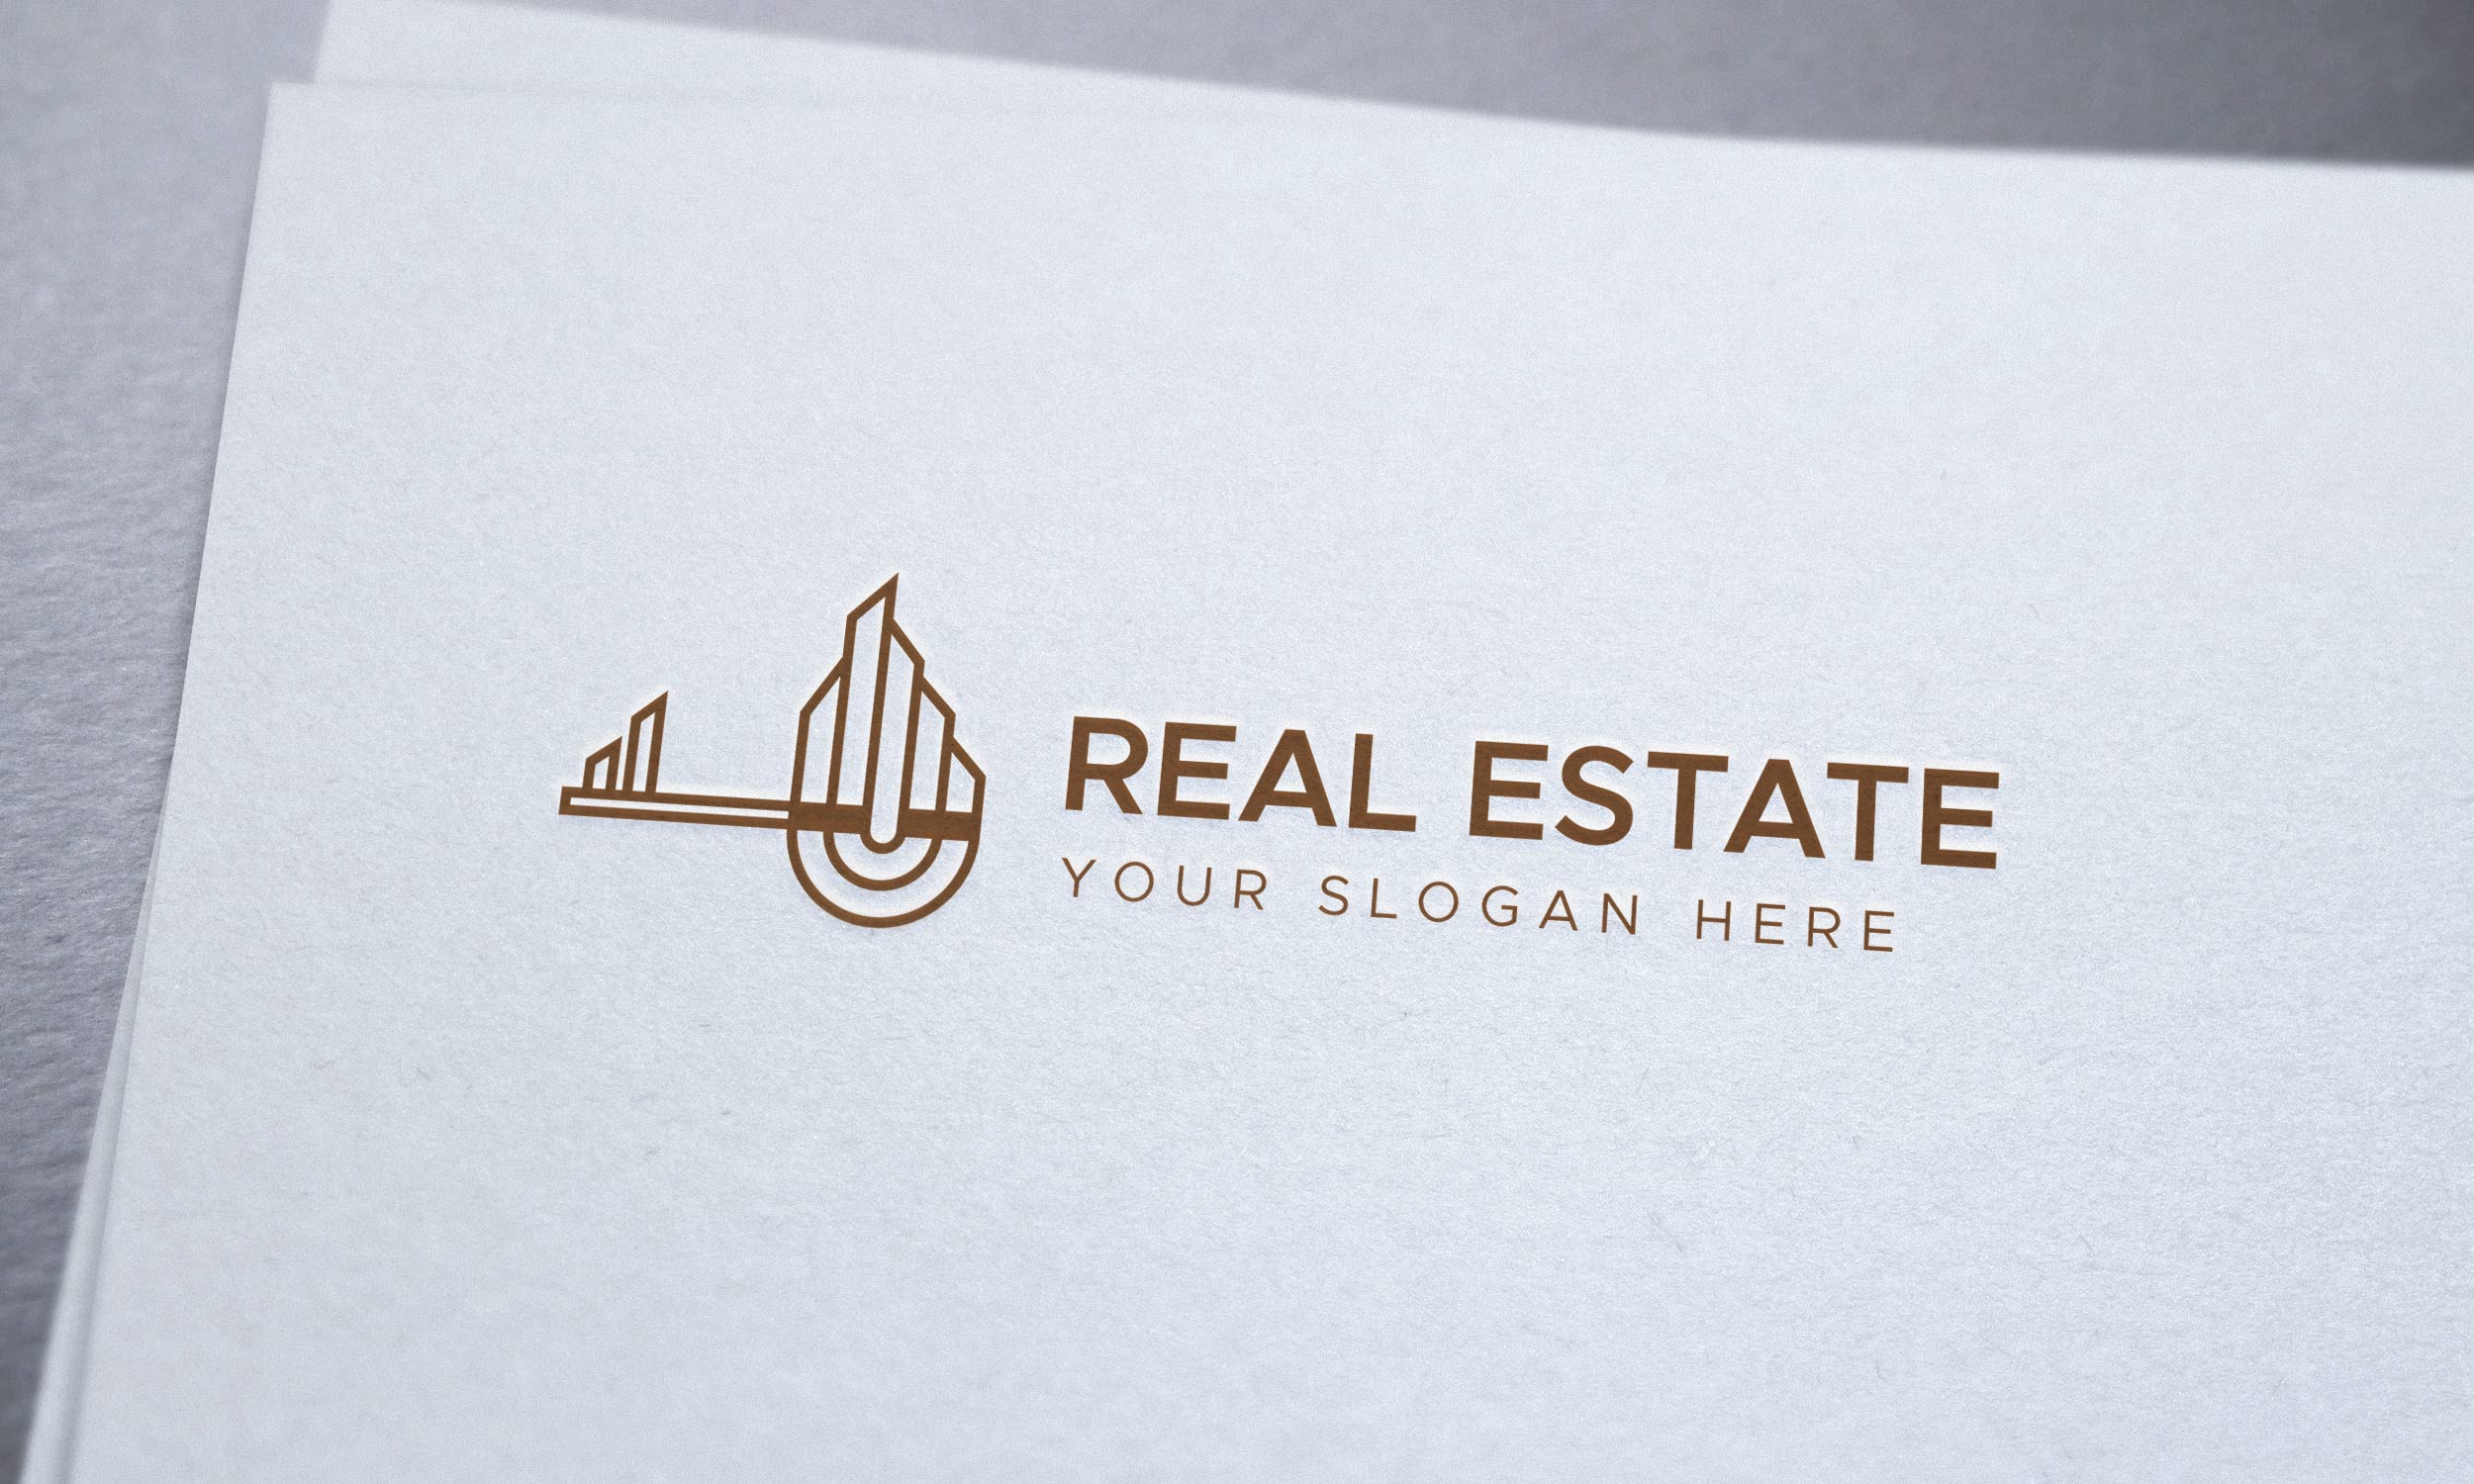 White paper with a gold logo.